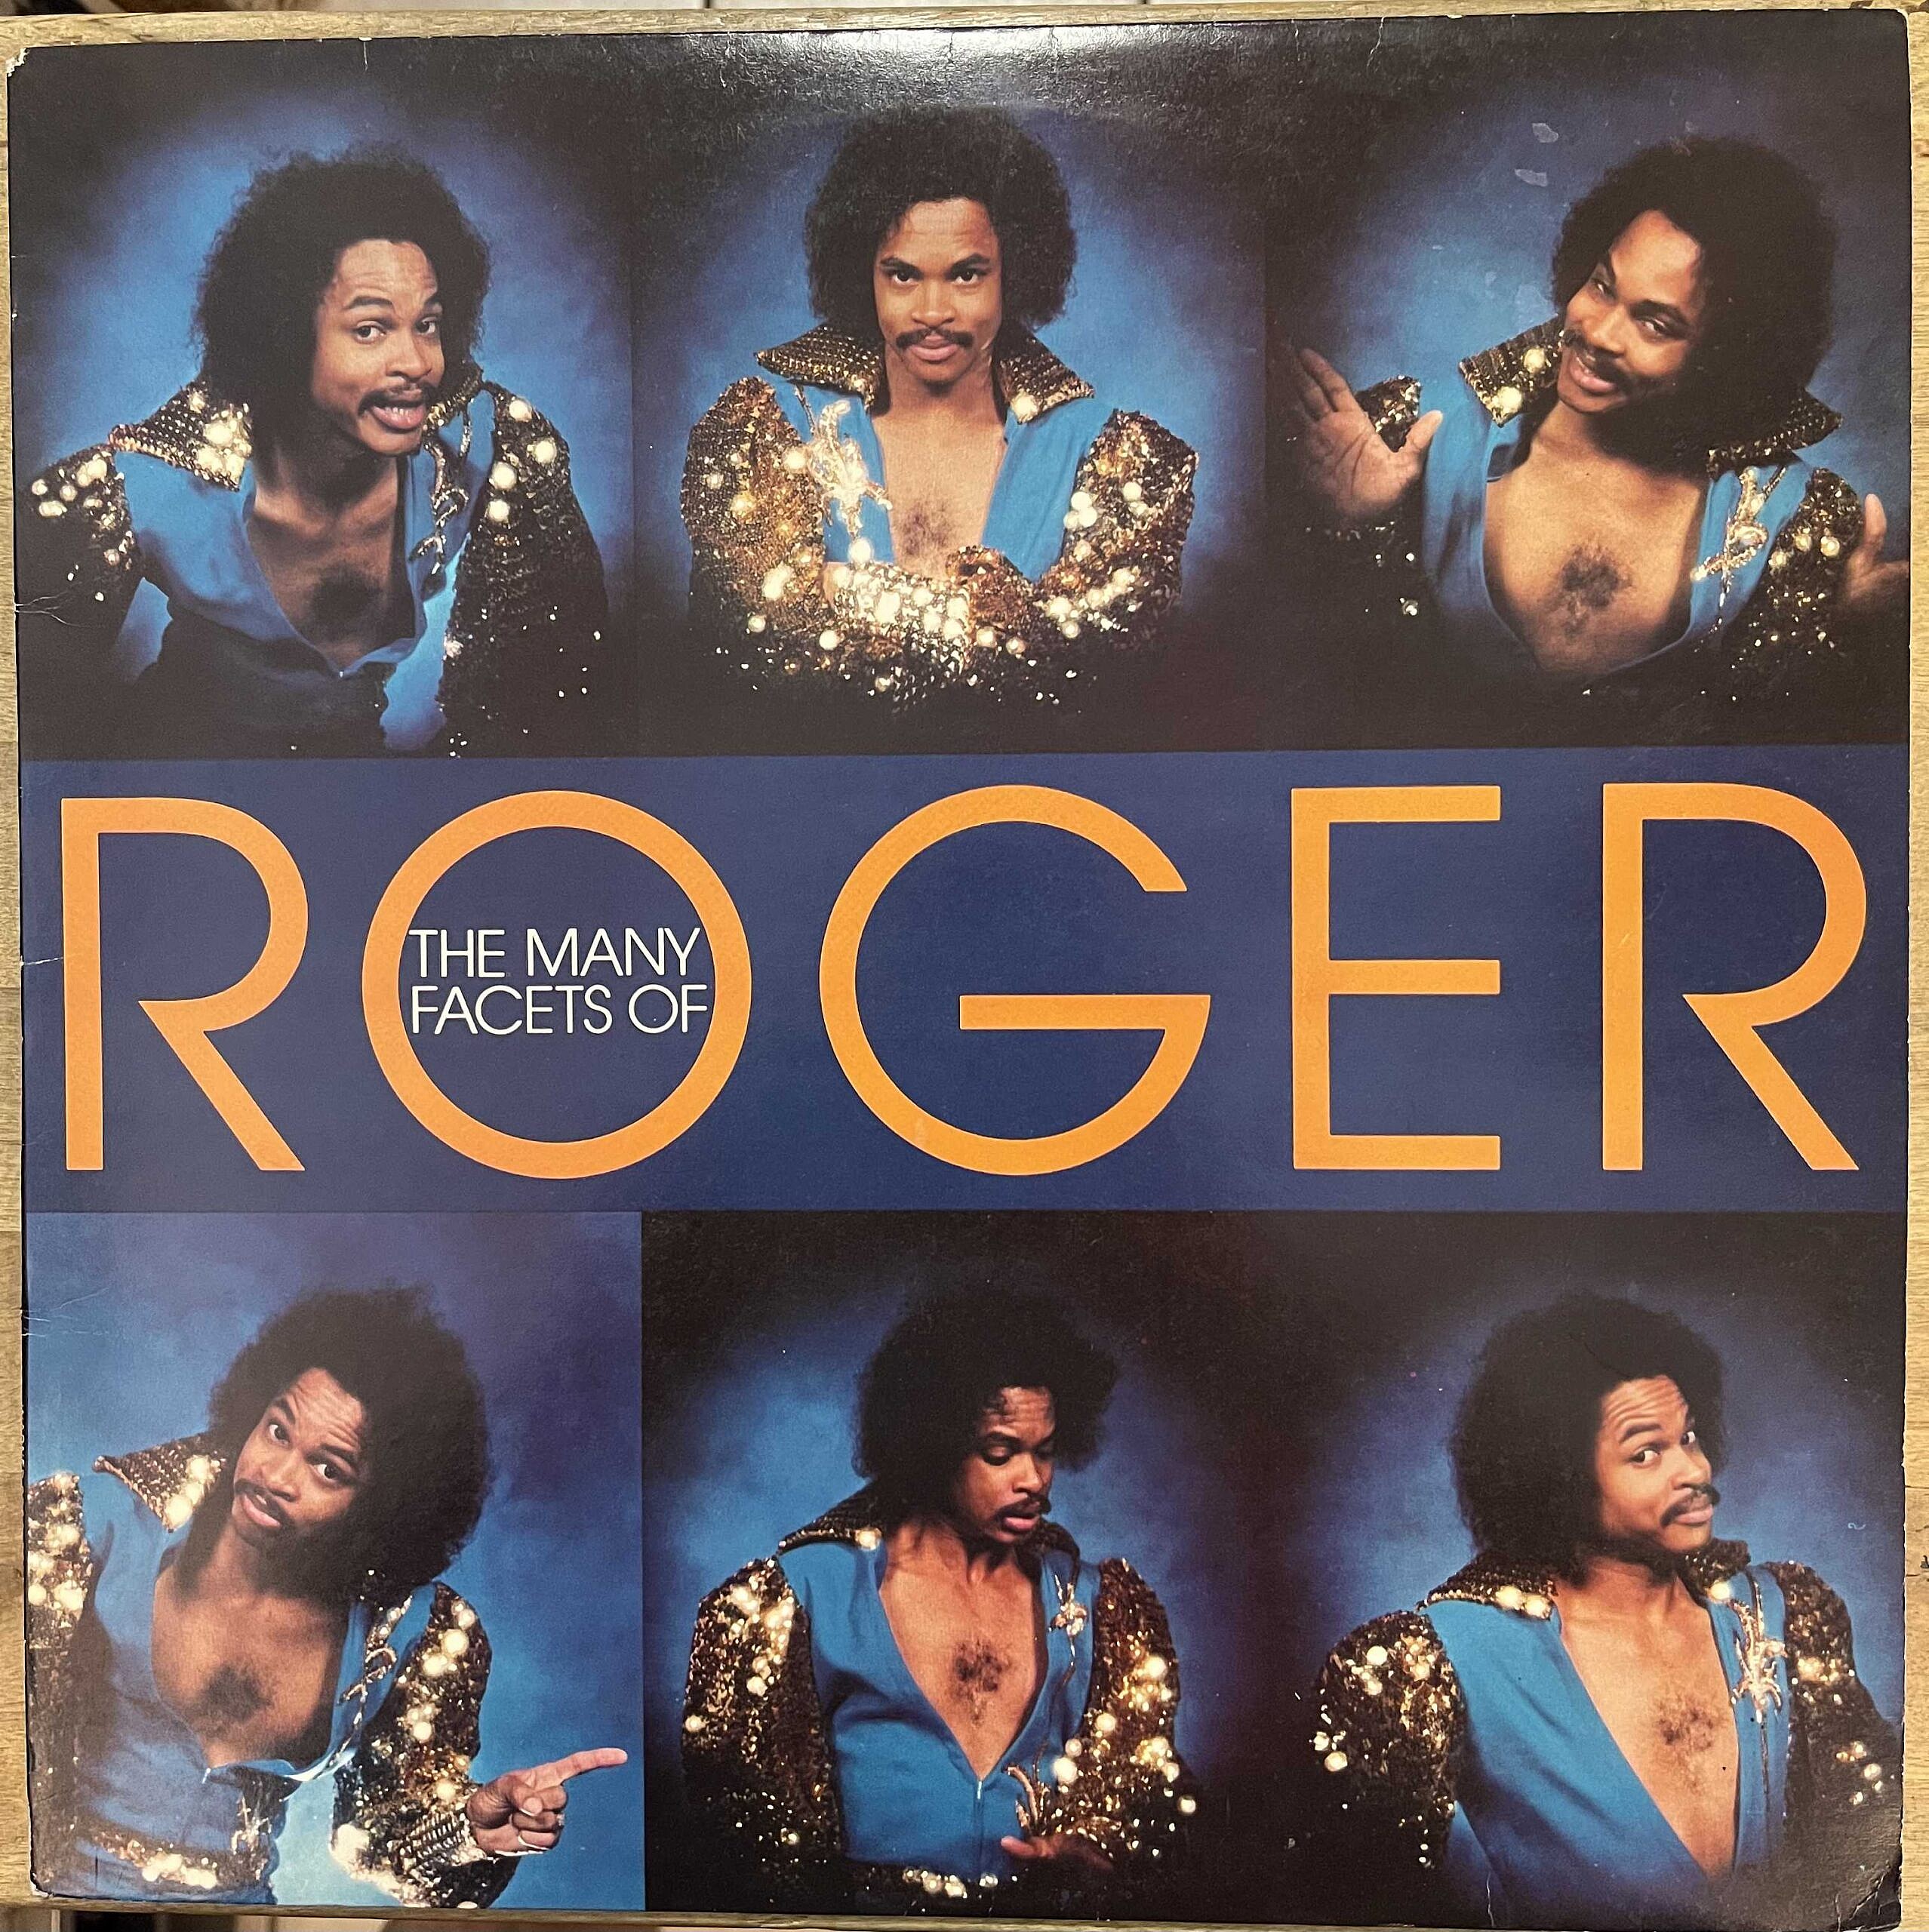 The Many Faces of Roger